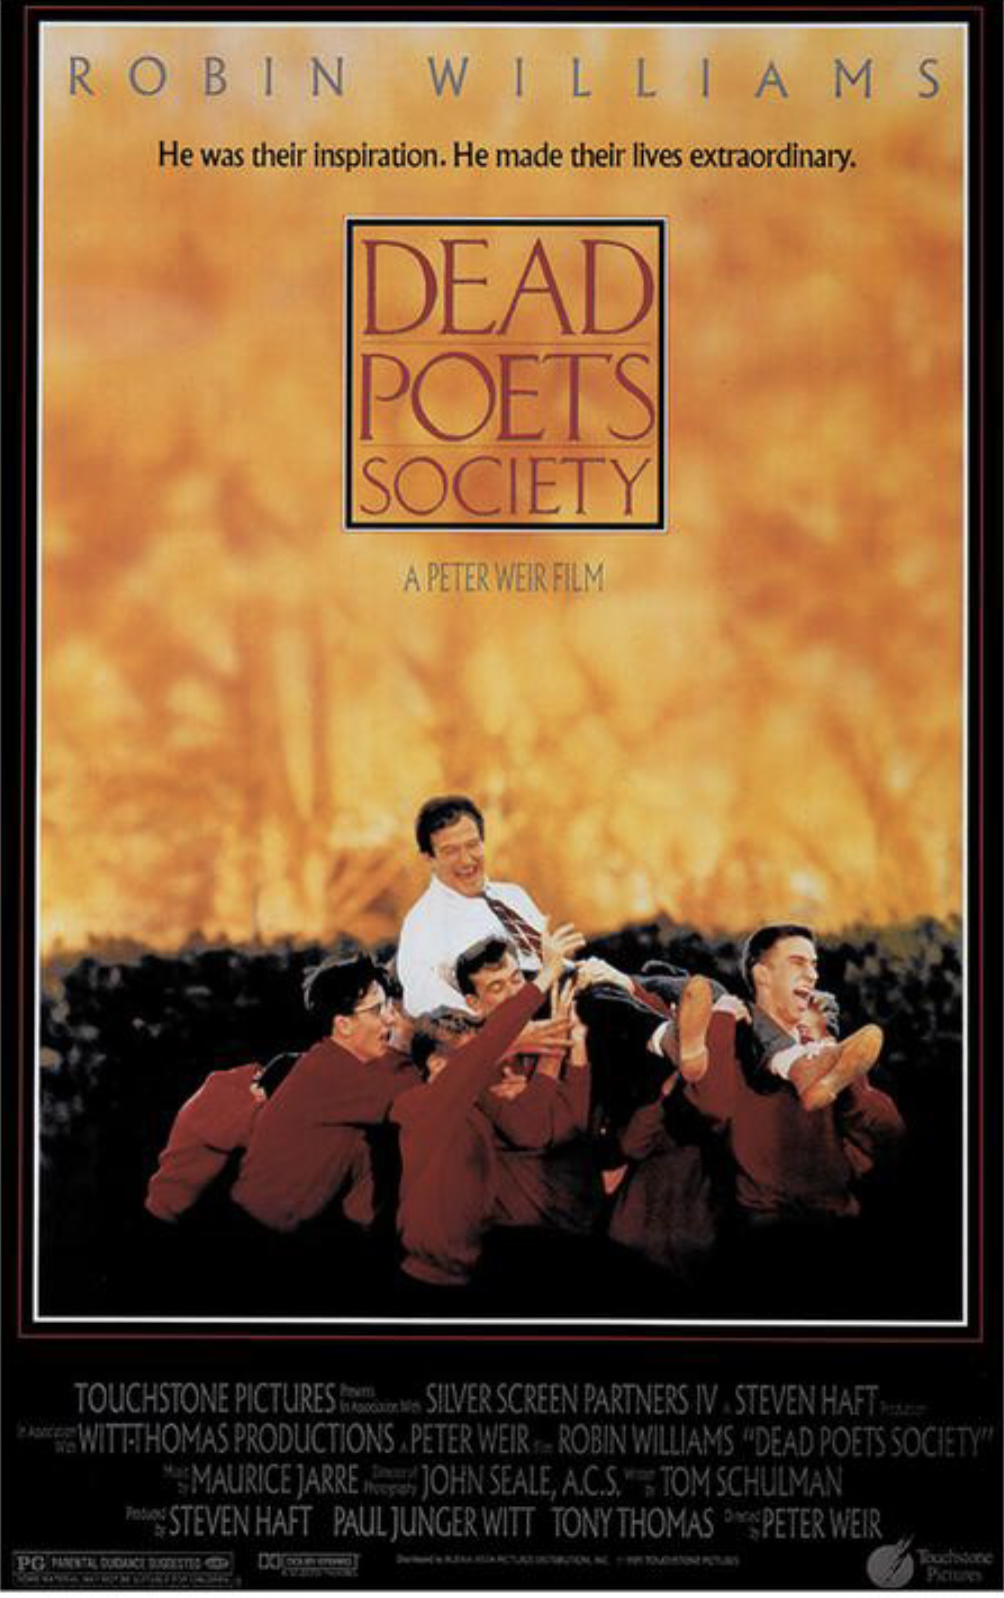 Evidence of Dead Poets Society "Neil's speech" deleted scene - Dead Poets Society (partially lost deleted scenes from Peter Weir teen drama film; 1989)